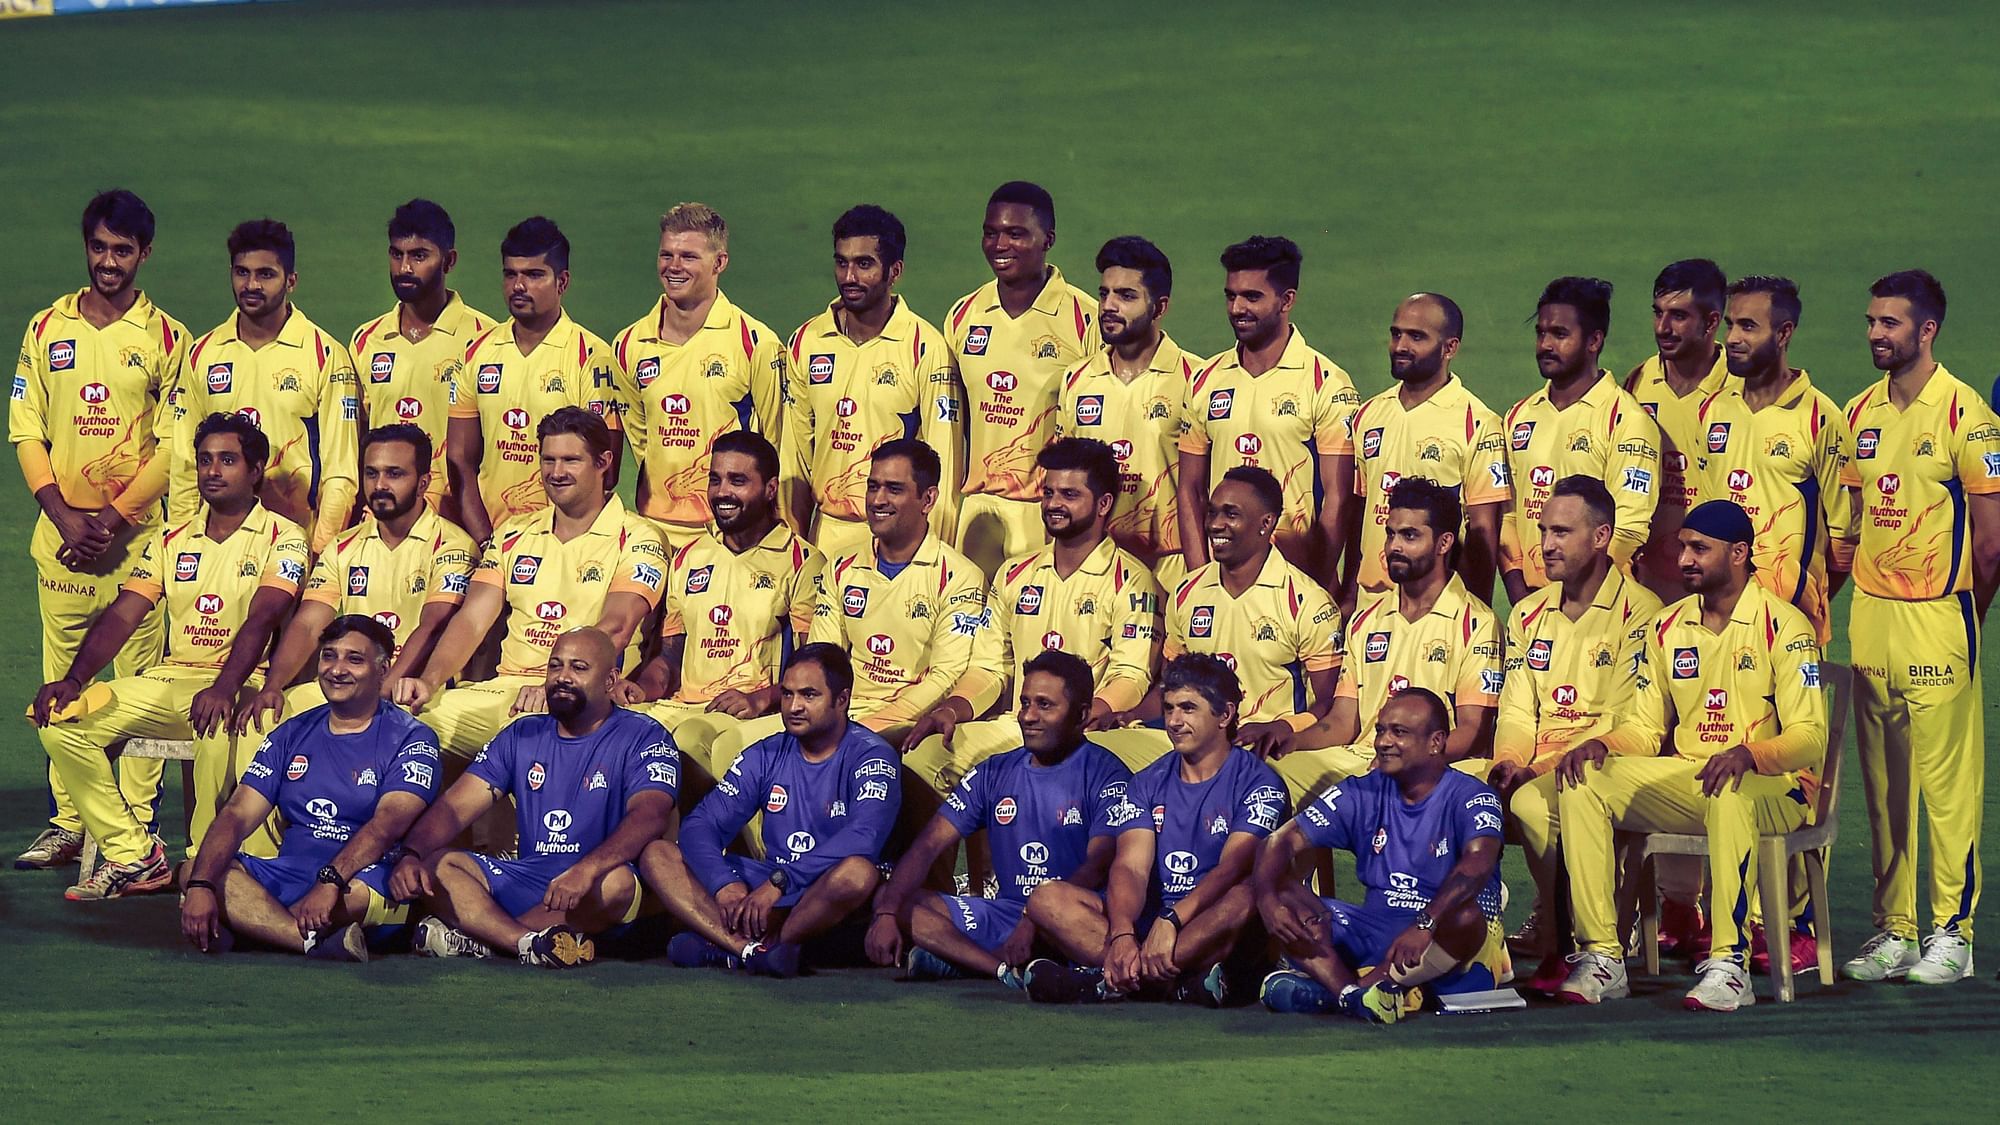 Chennai Super Kings returned to the IPL after two seasons in 2018 and ended up winning the title.